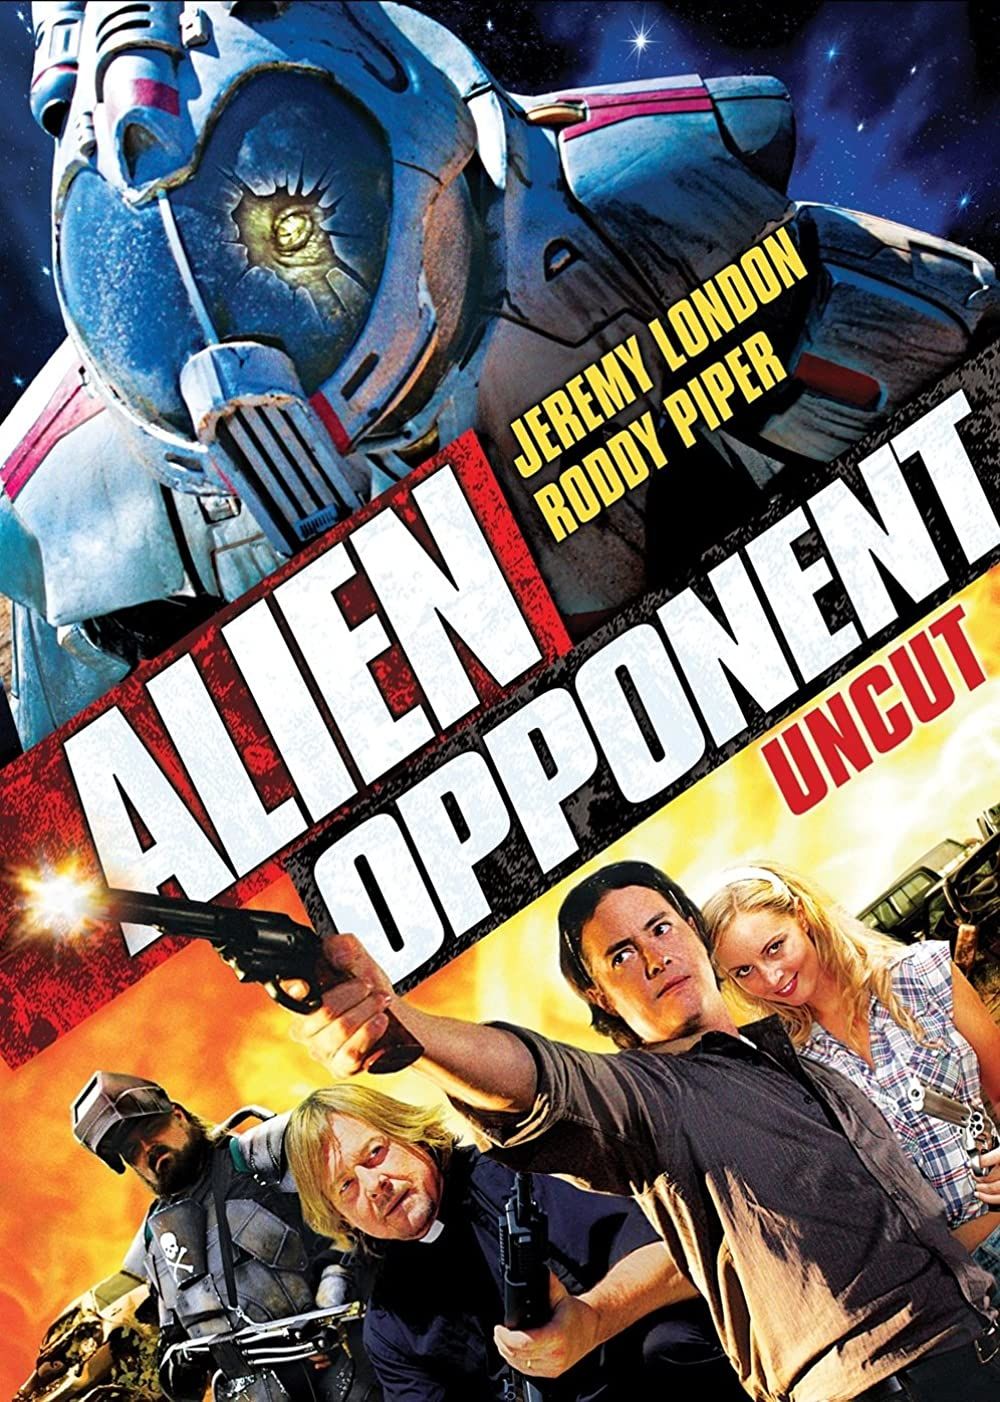 Alien Opponent (2010) Hindi Dubbed UNCUT BluRay download full movie